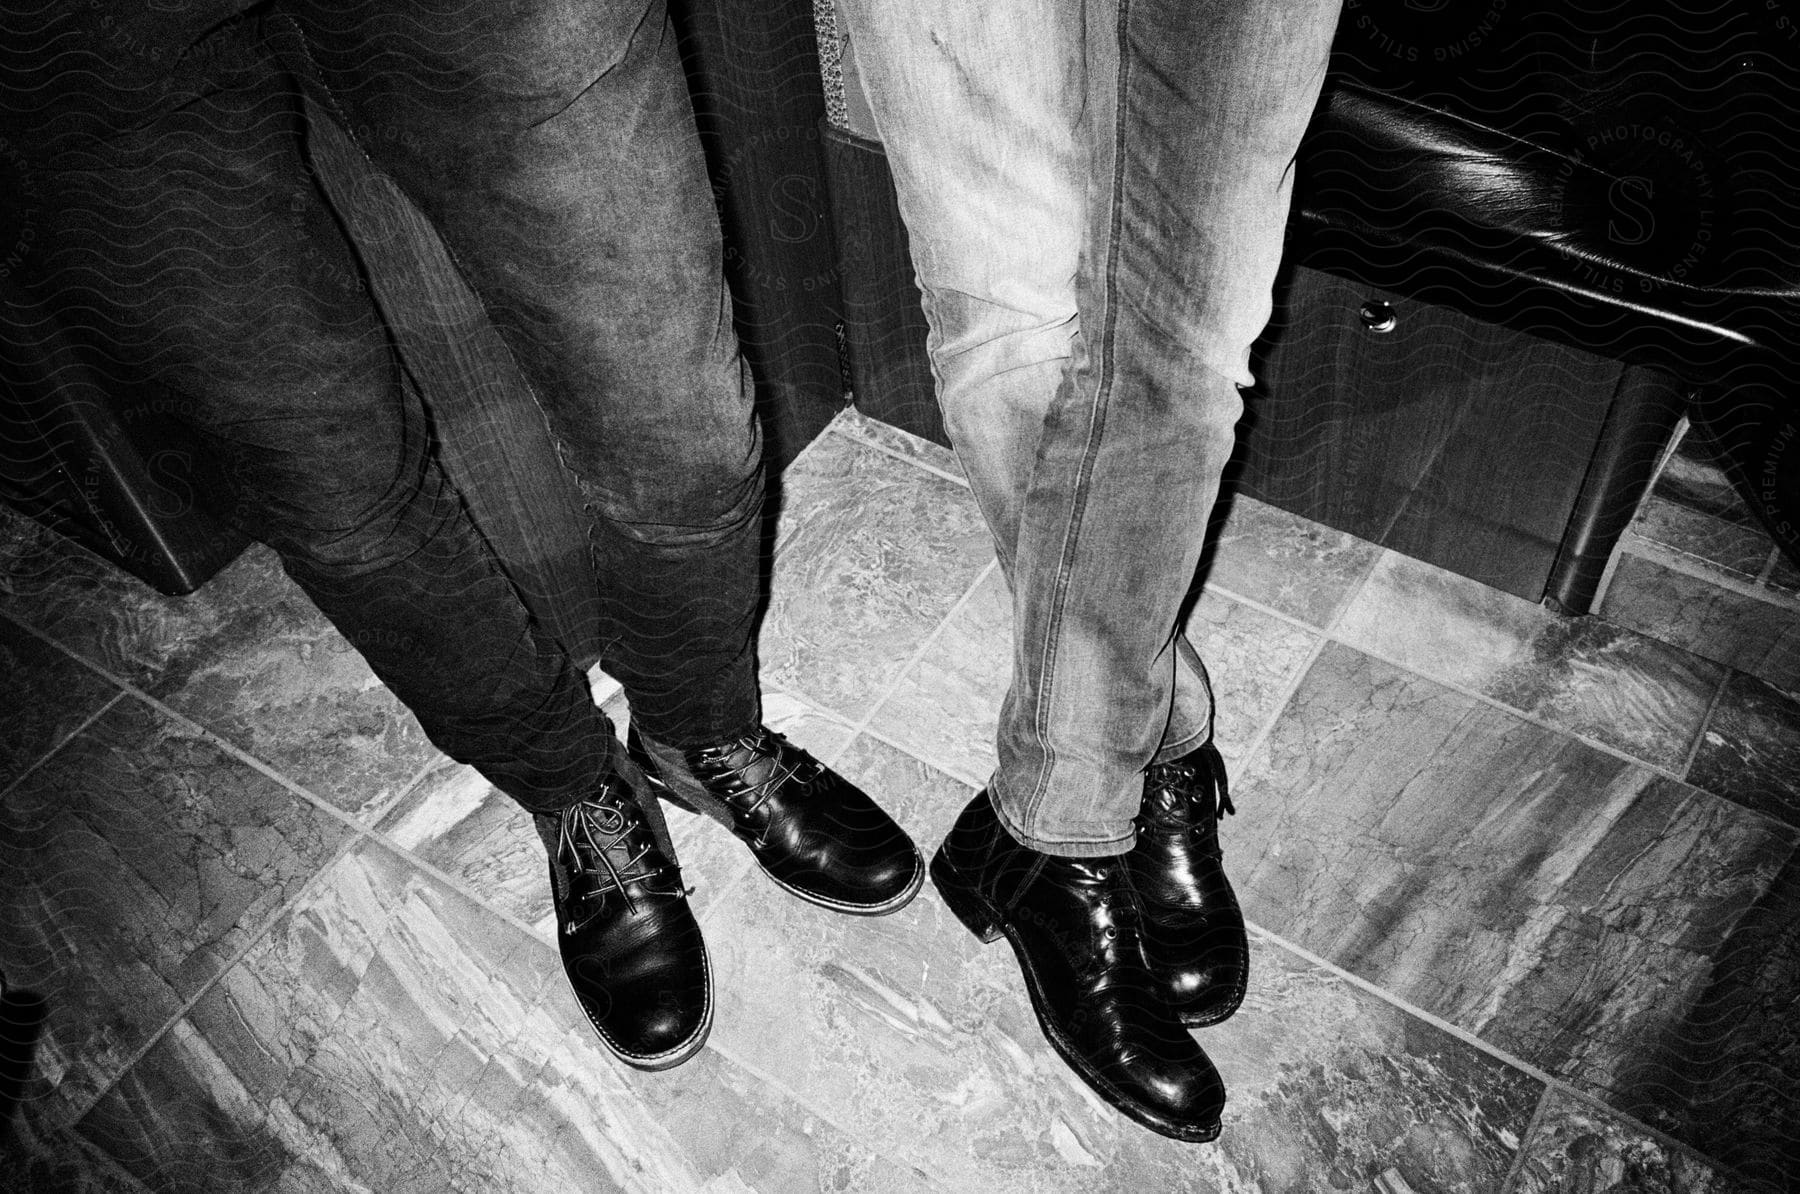 Two men standing with their feet on a grey floor wearing jeans and shoes